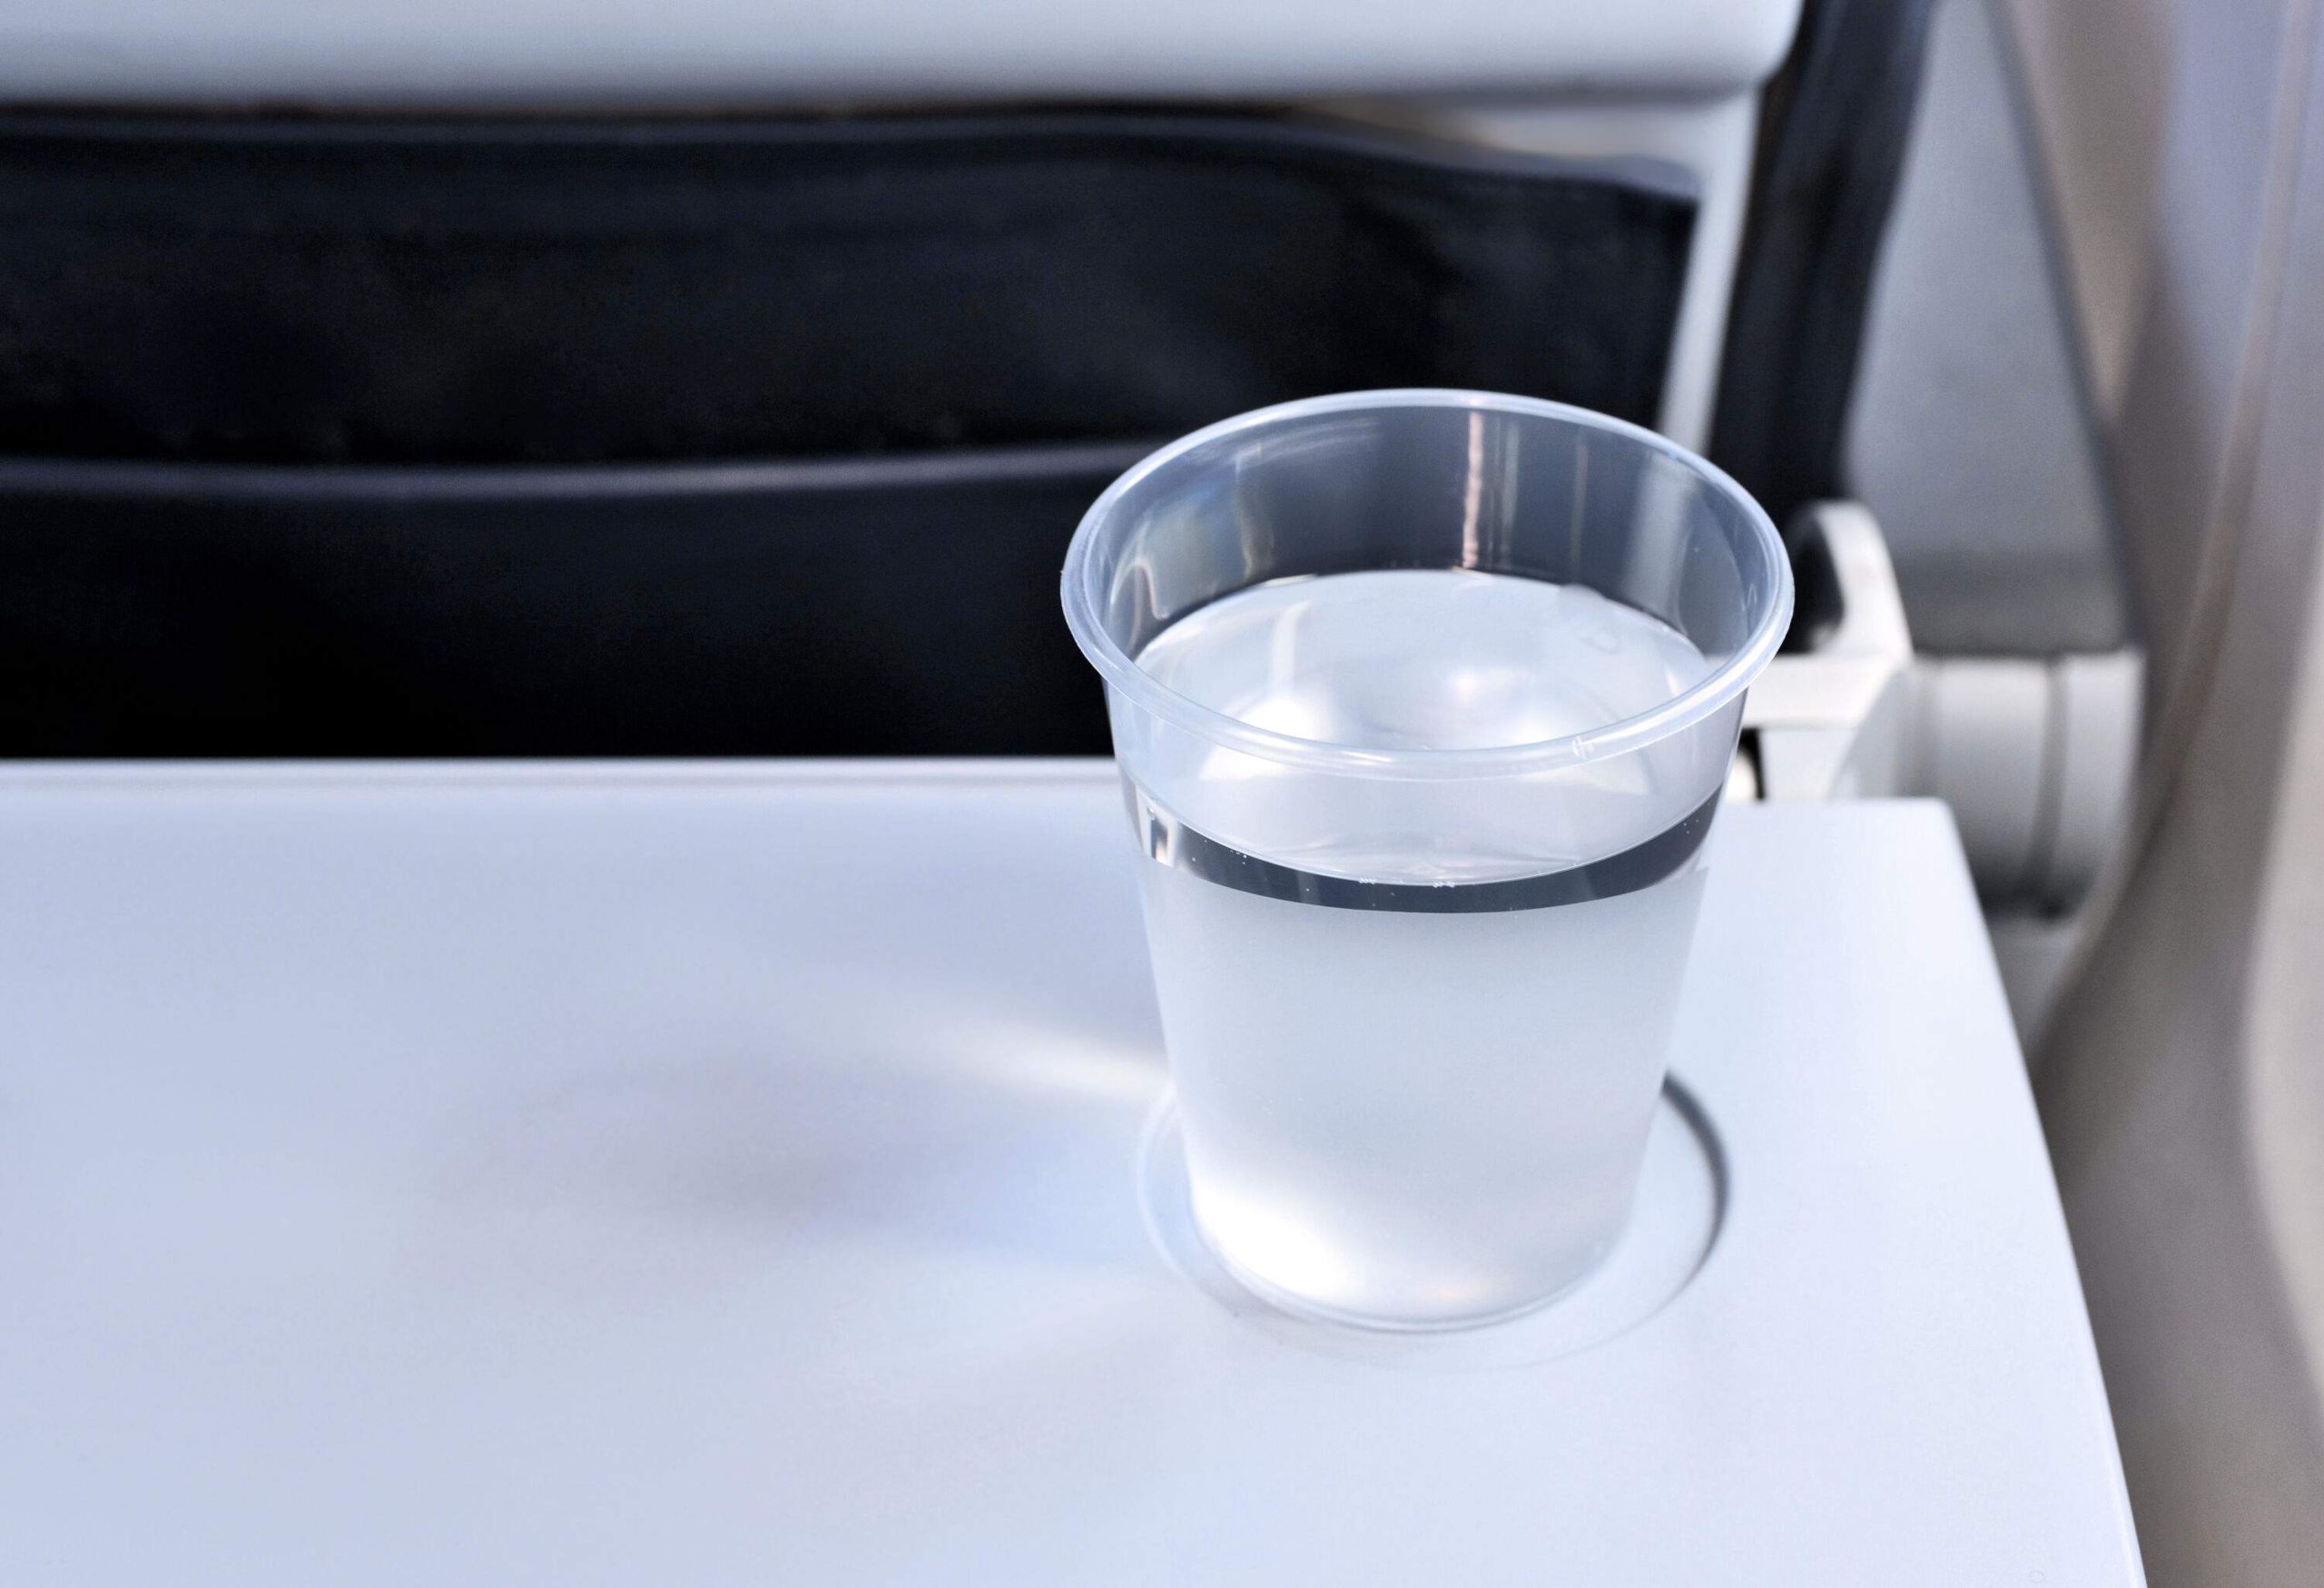 A plastic cup of water on a tray table.